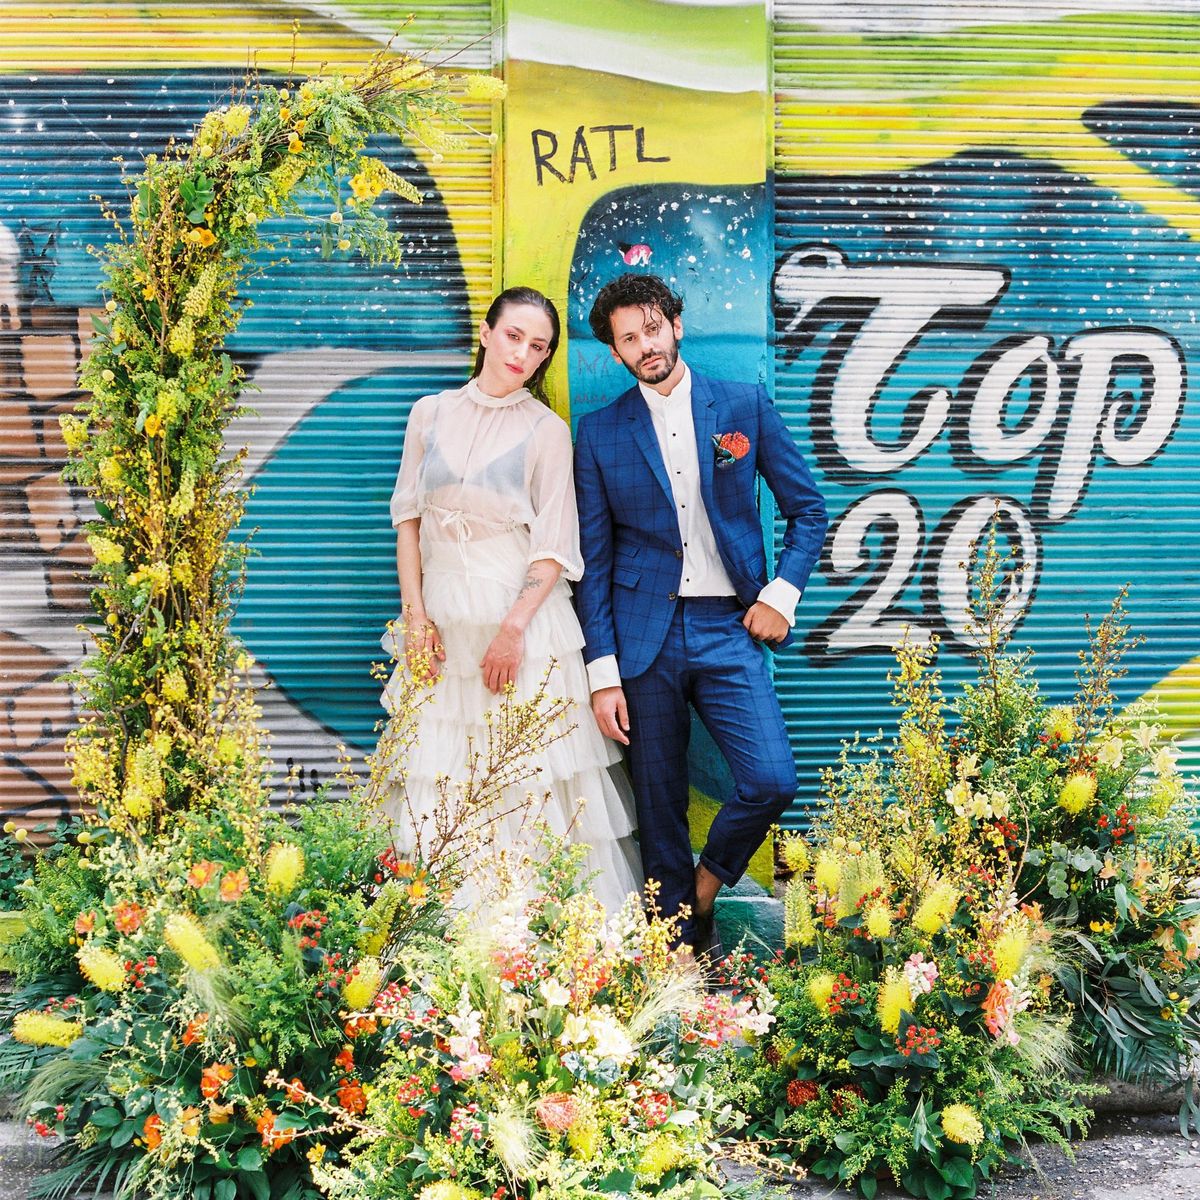 5 Unexpected Wedding Decor Trends That Will Dominate 2019